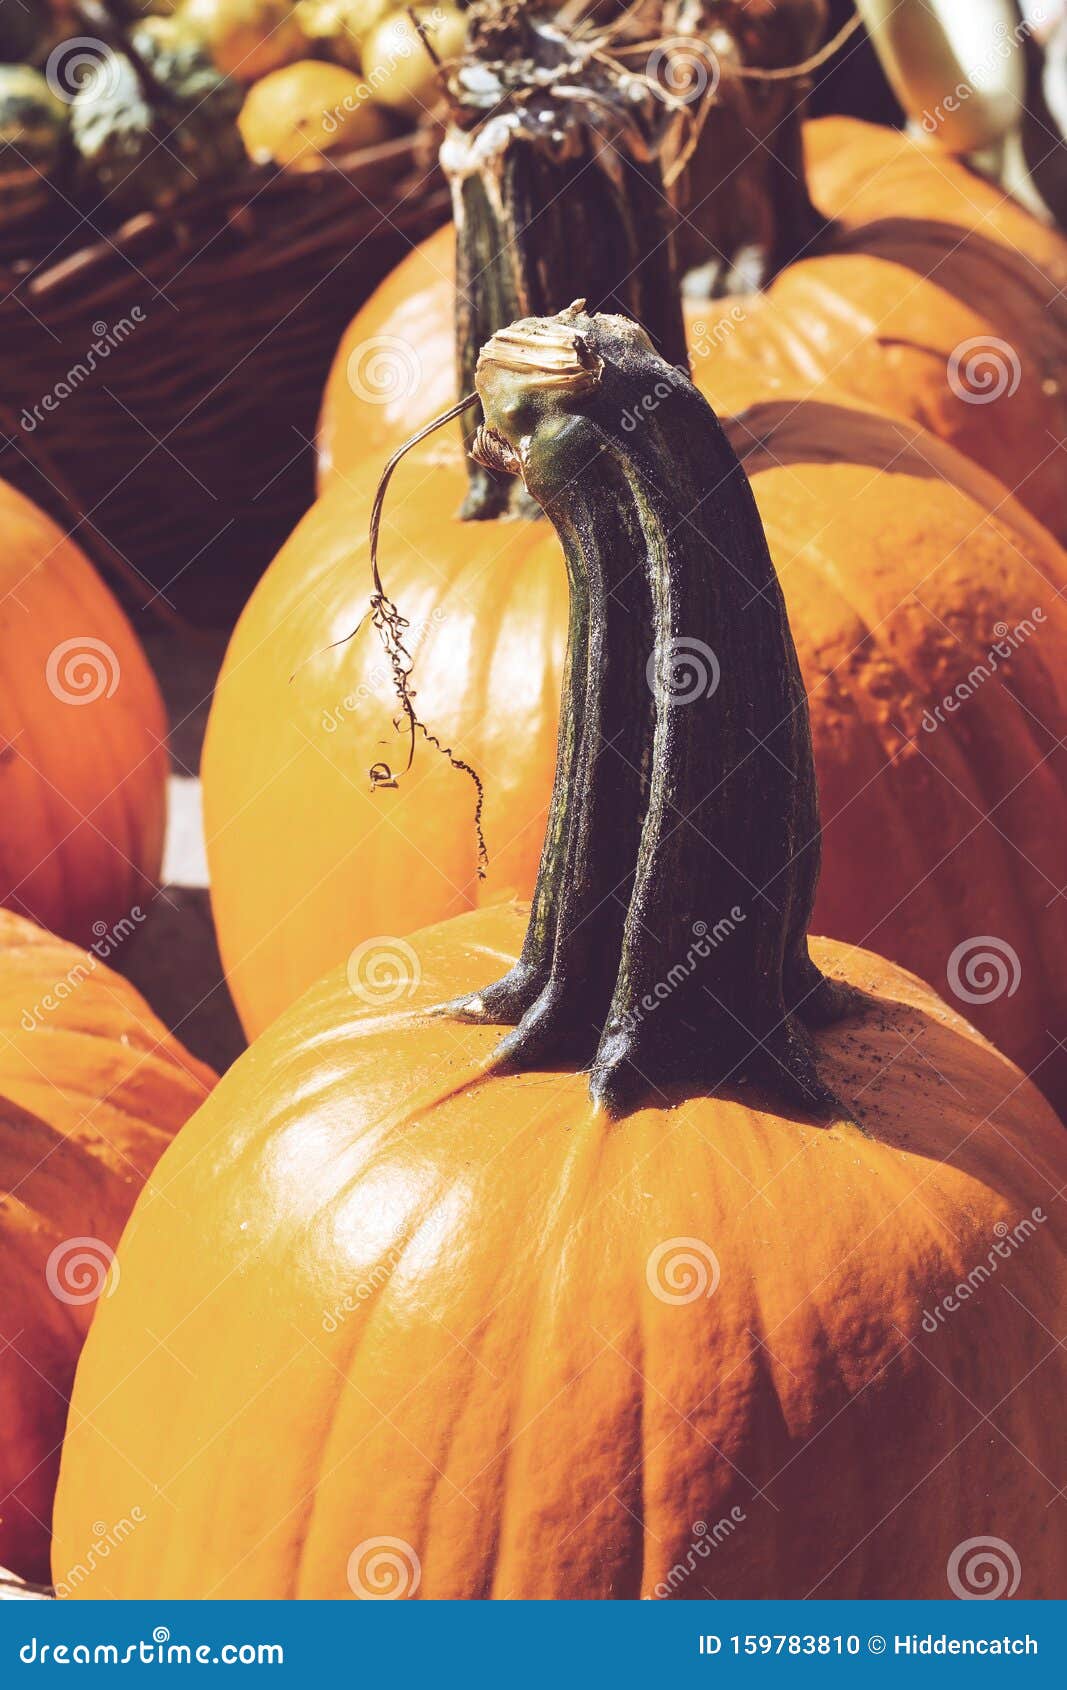 decorative mini pumpkins and gourds, on locale farmers market; autumn background